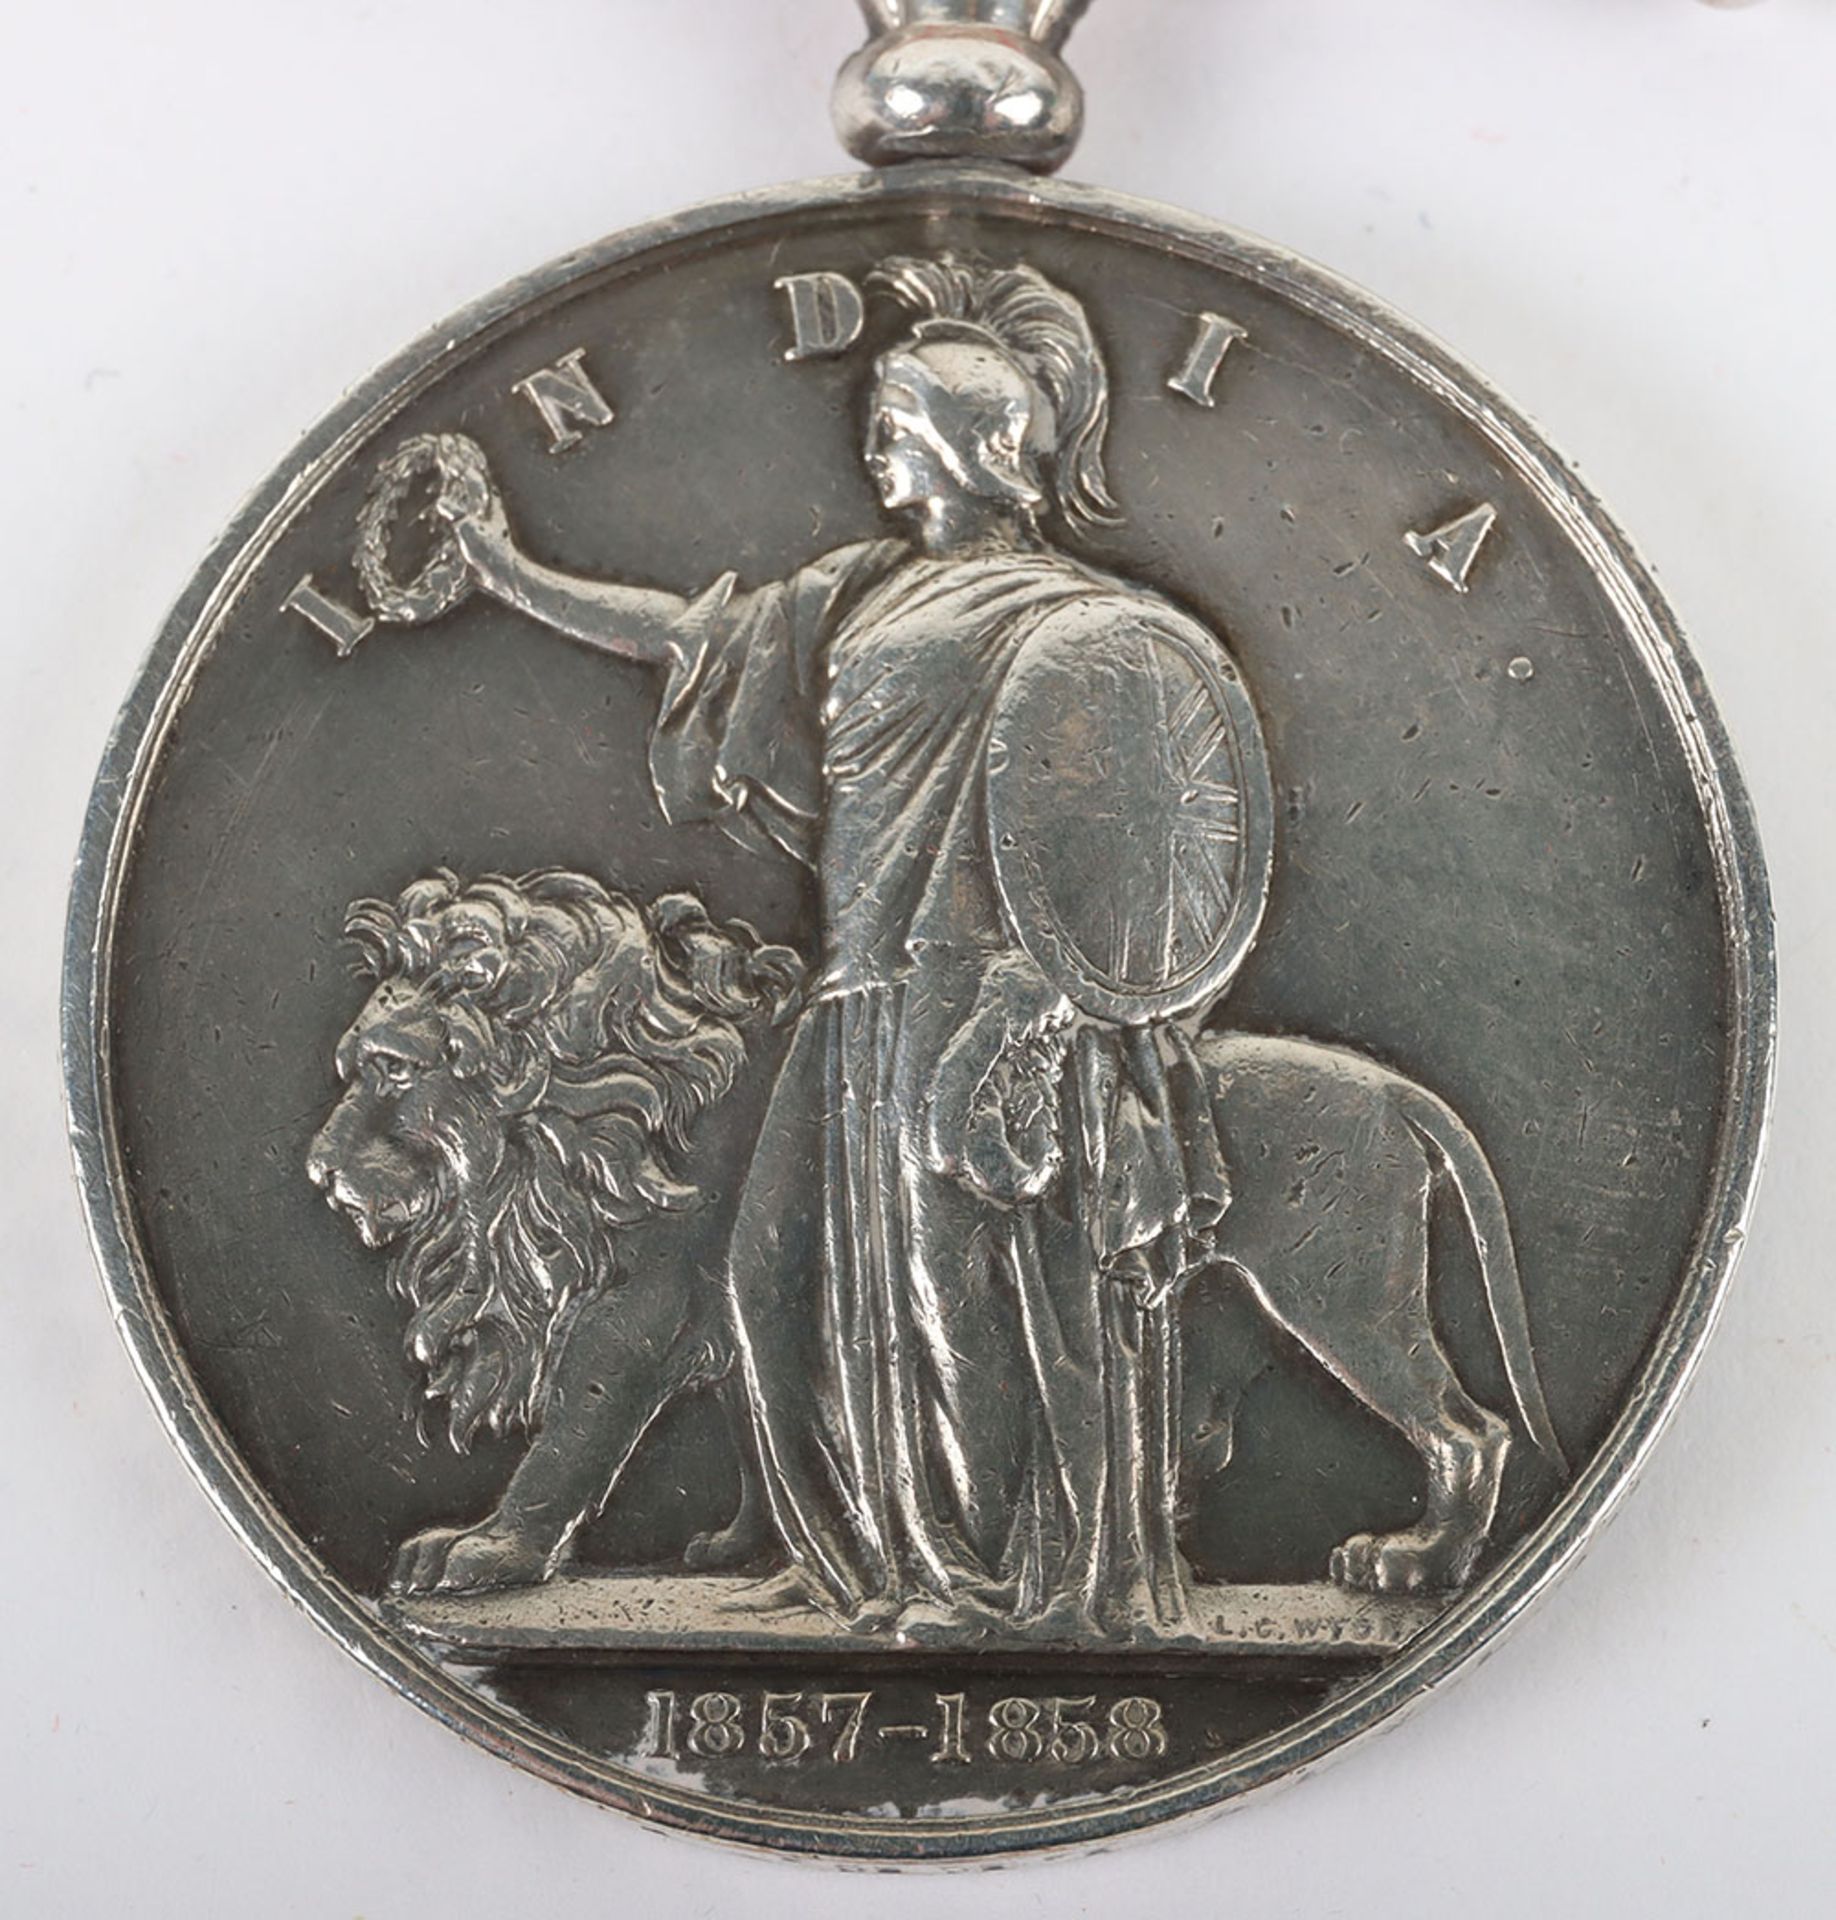 Indian Mutiny Medal Awarded to a Corporal of the 8th (Kings) Regiment Who Was Killed in Action Durin - Bild 3 aus 6